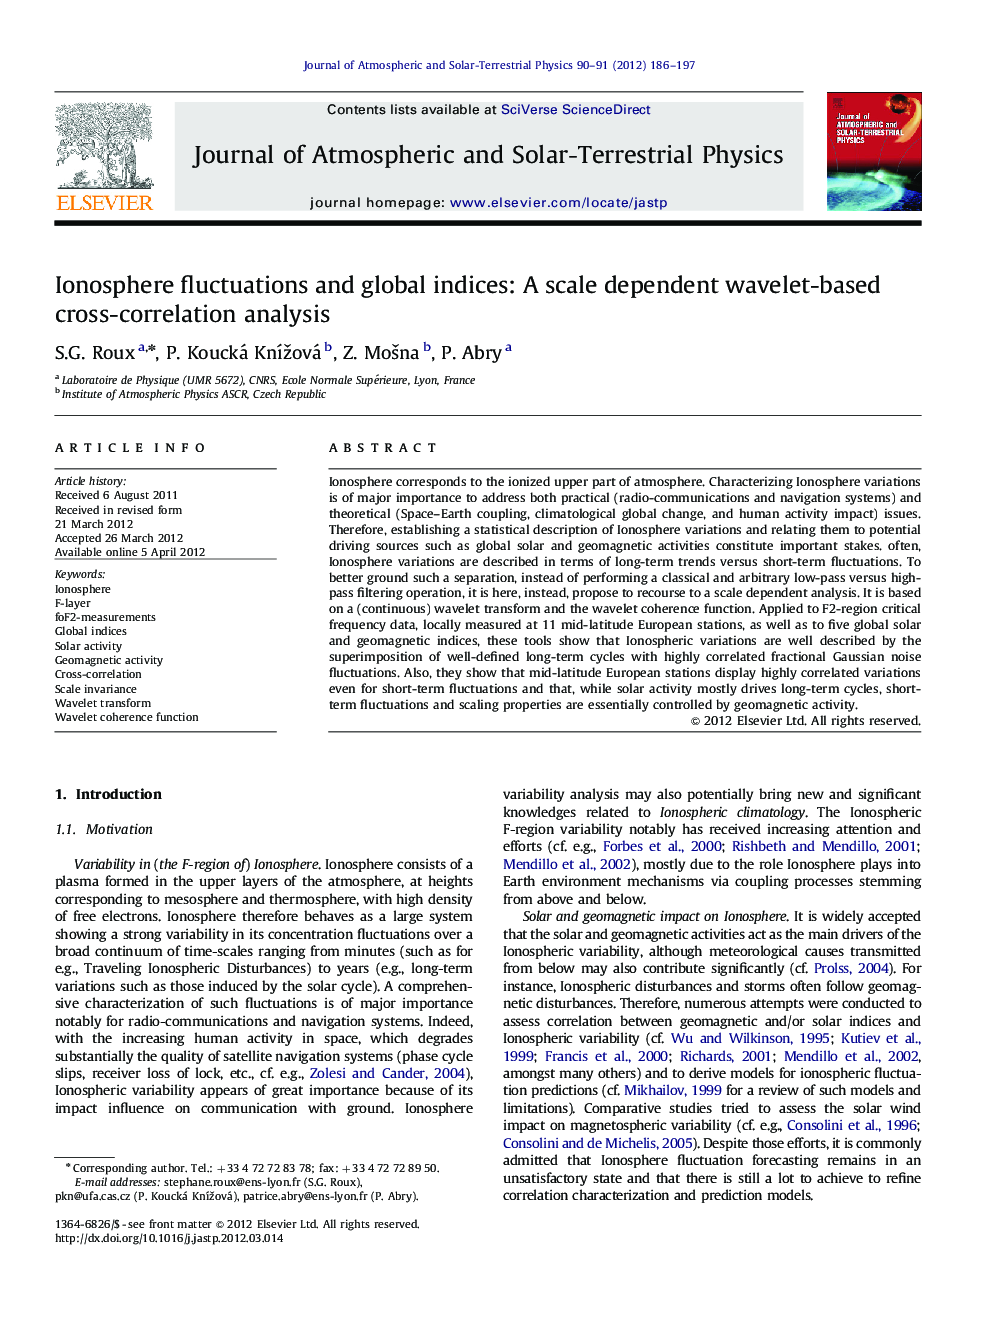 Ionosphere fluctuations and global indices: A scale dependent wavelet-based cross-correlation analysis